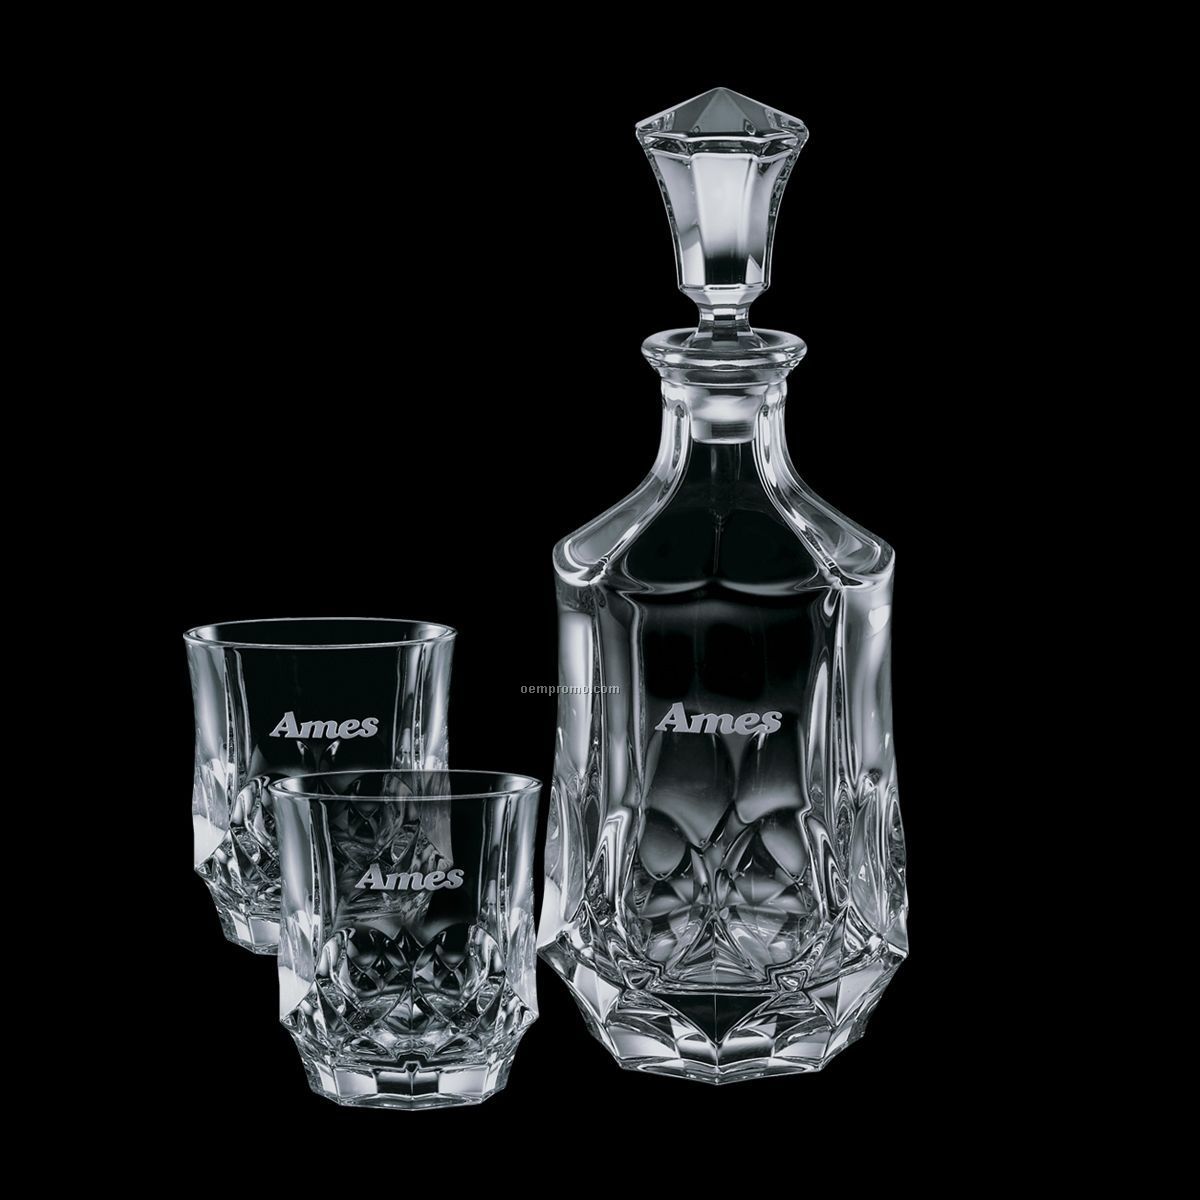 25 Oz. Foxborough Crystal Decanter With 2 On The Rocks Glasses